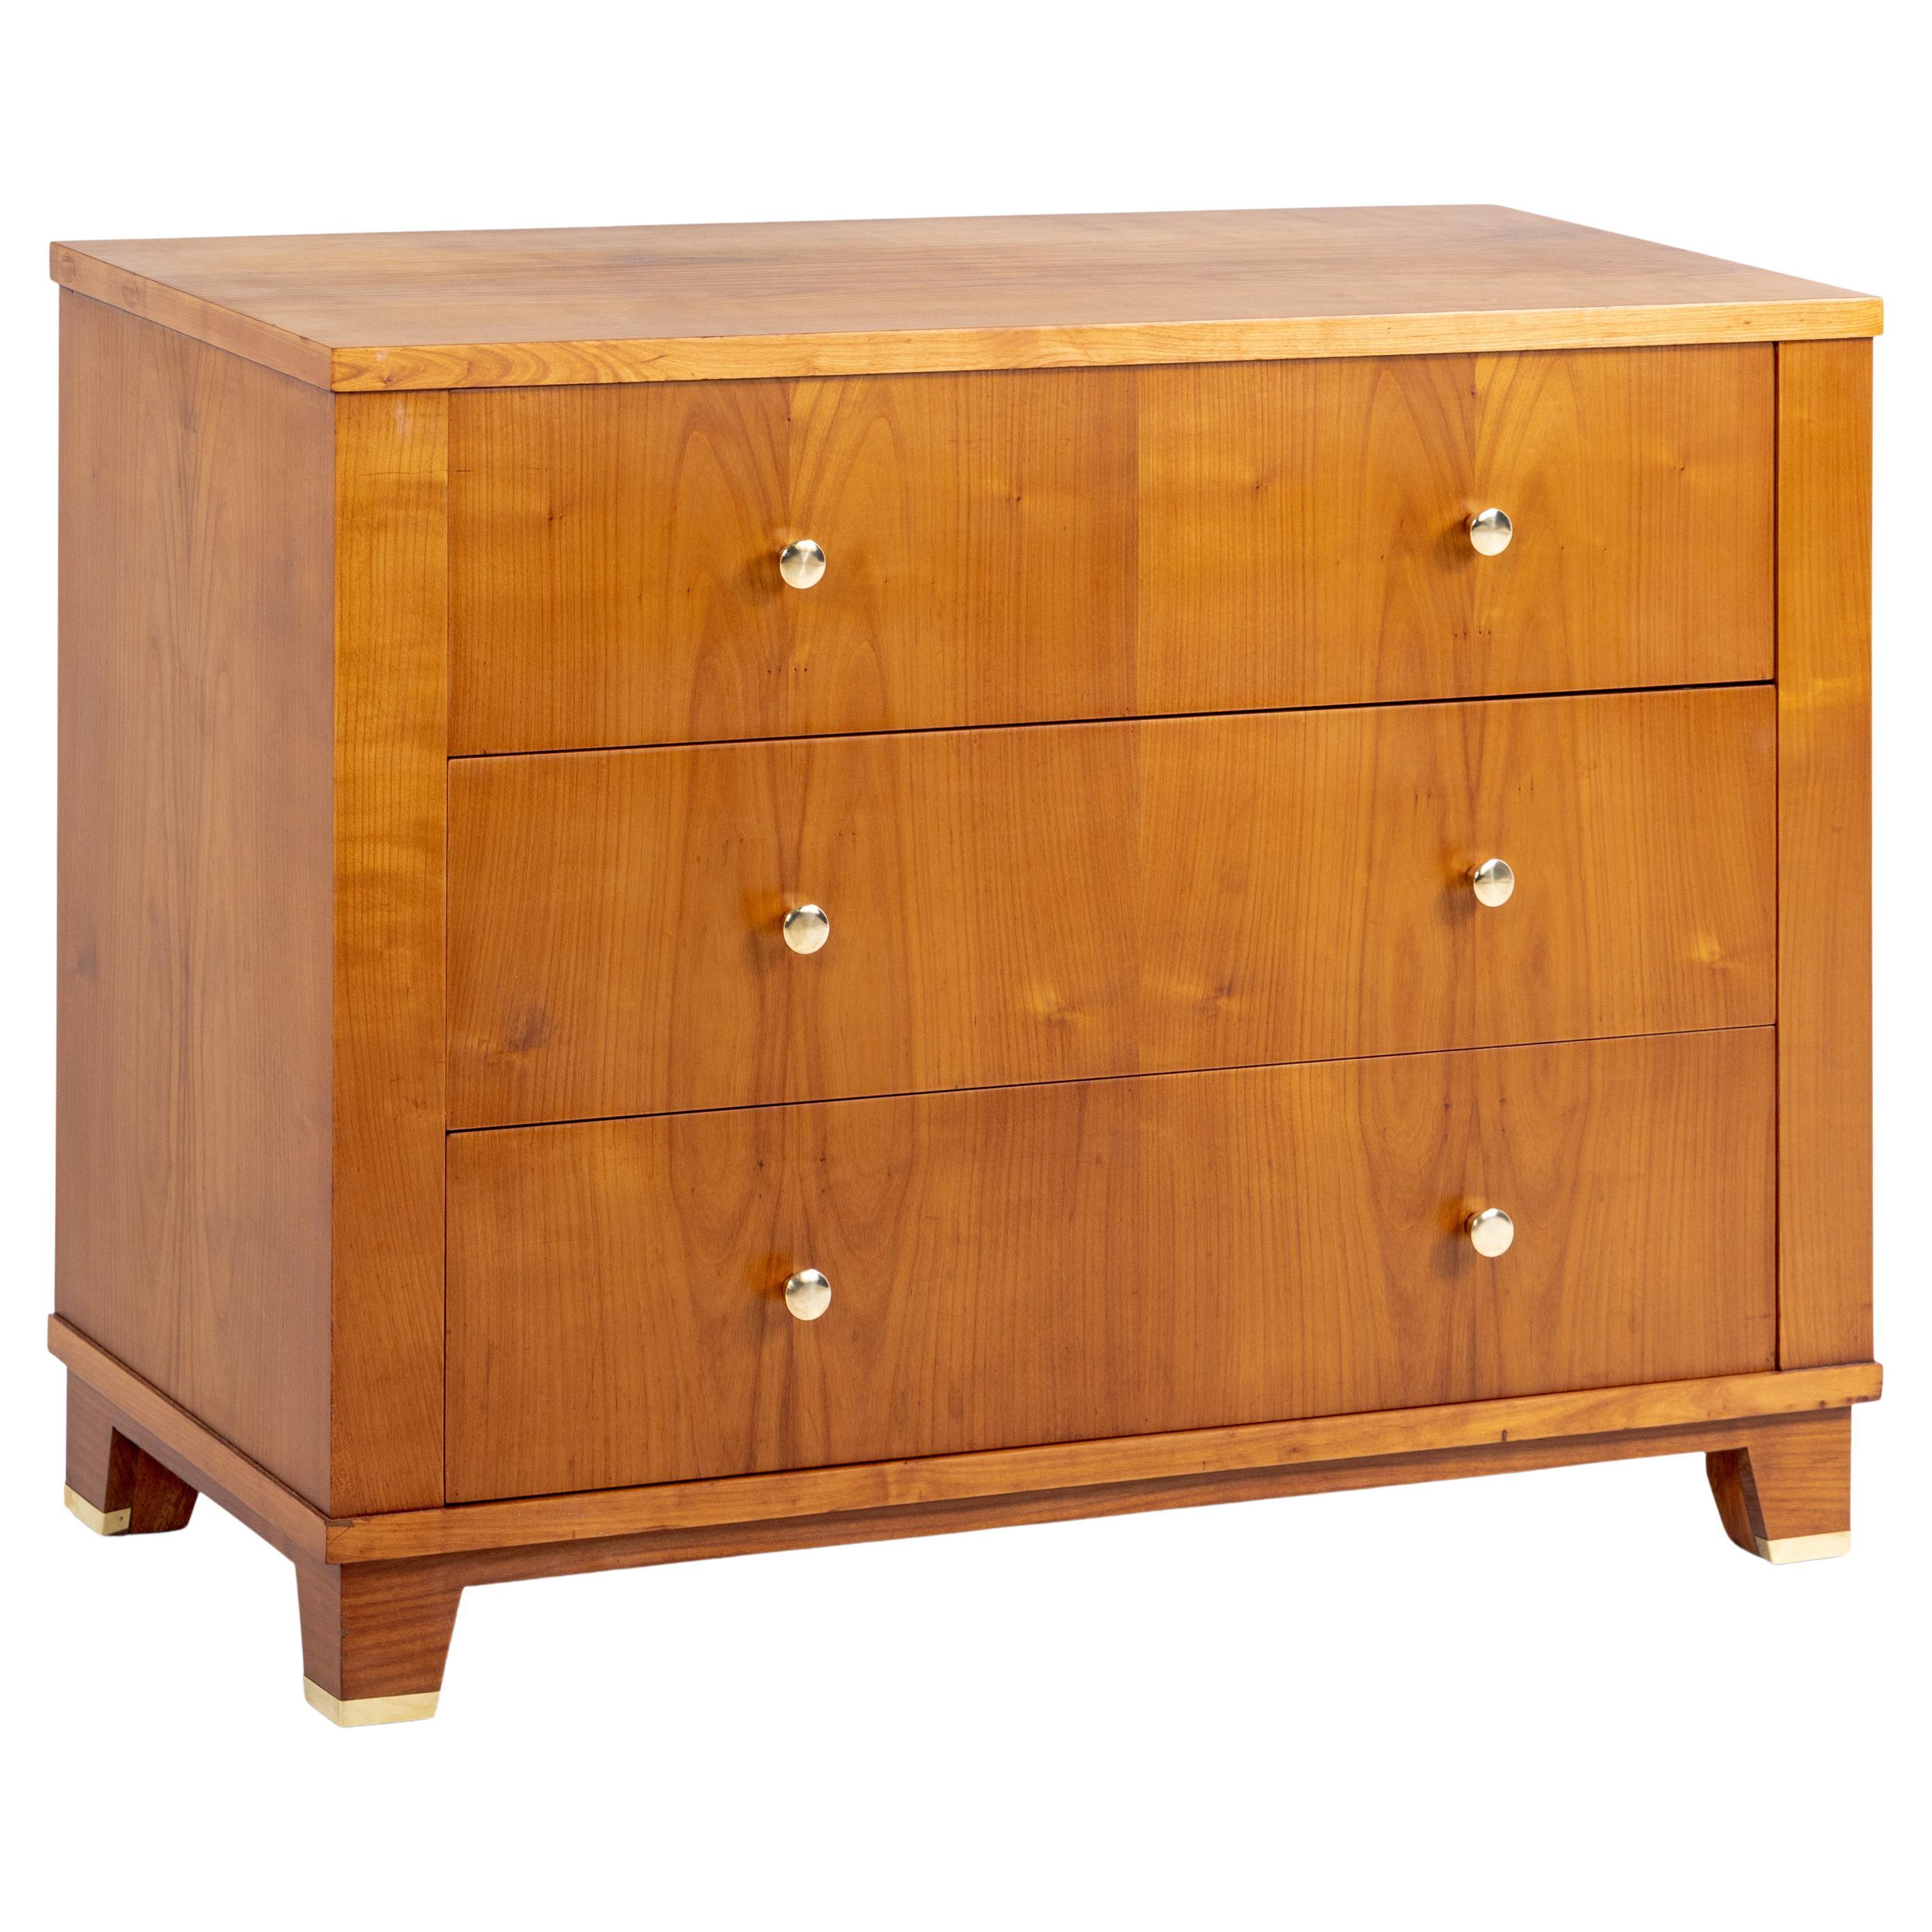 Modernist Chest of Drawers, Mid-20th Century